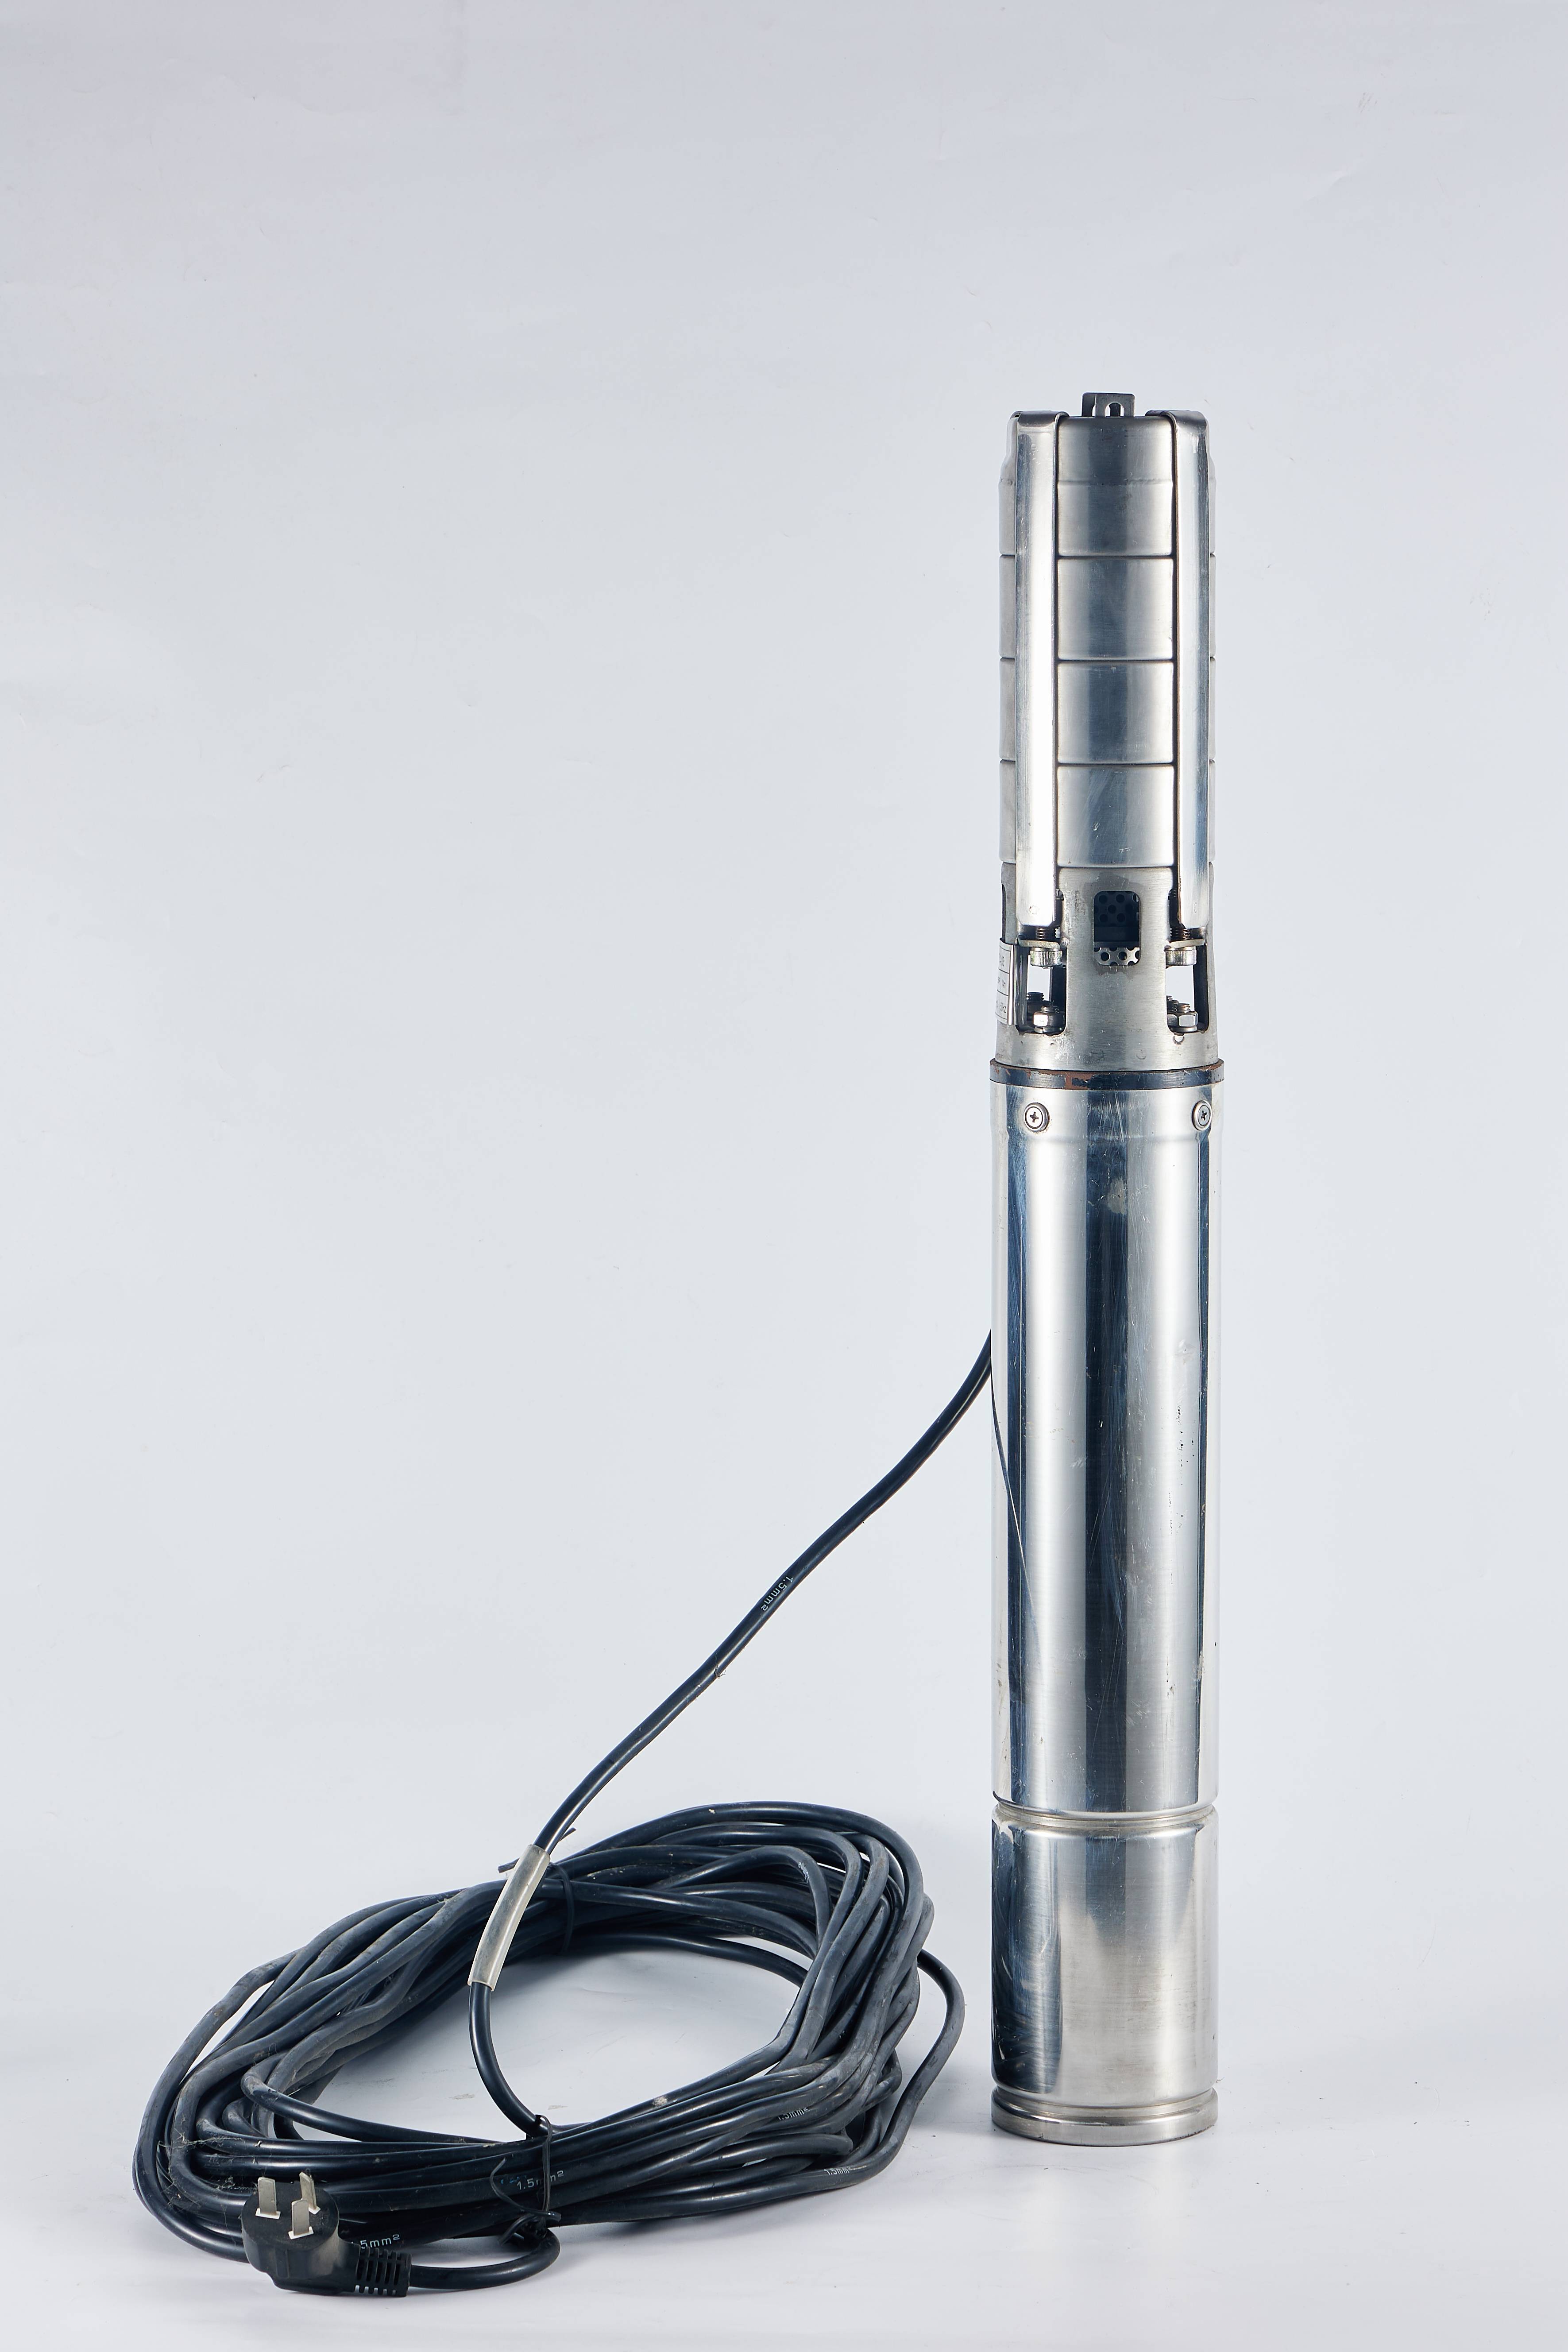 Cheap Wholesale Price Submersible Pumps with Float Switch China Factory Bulk Supply